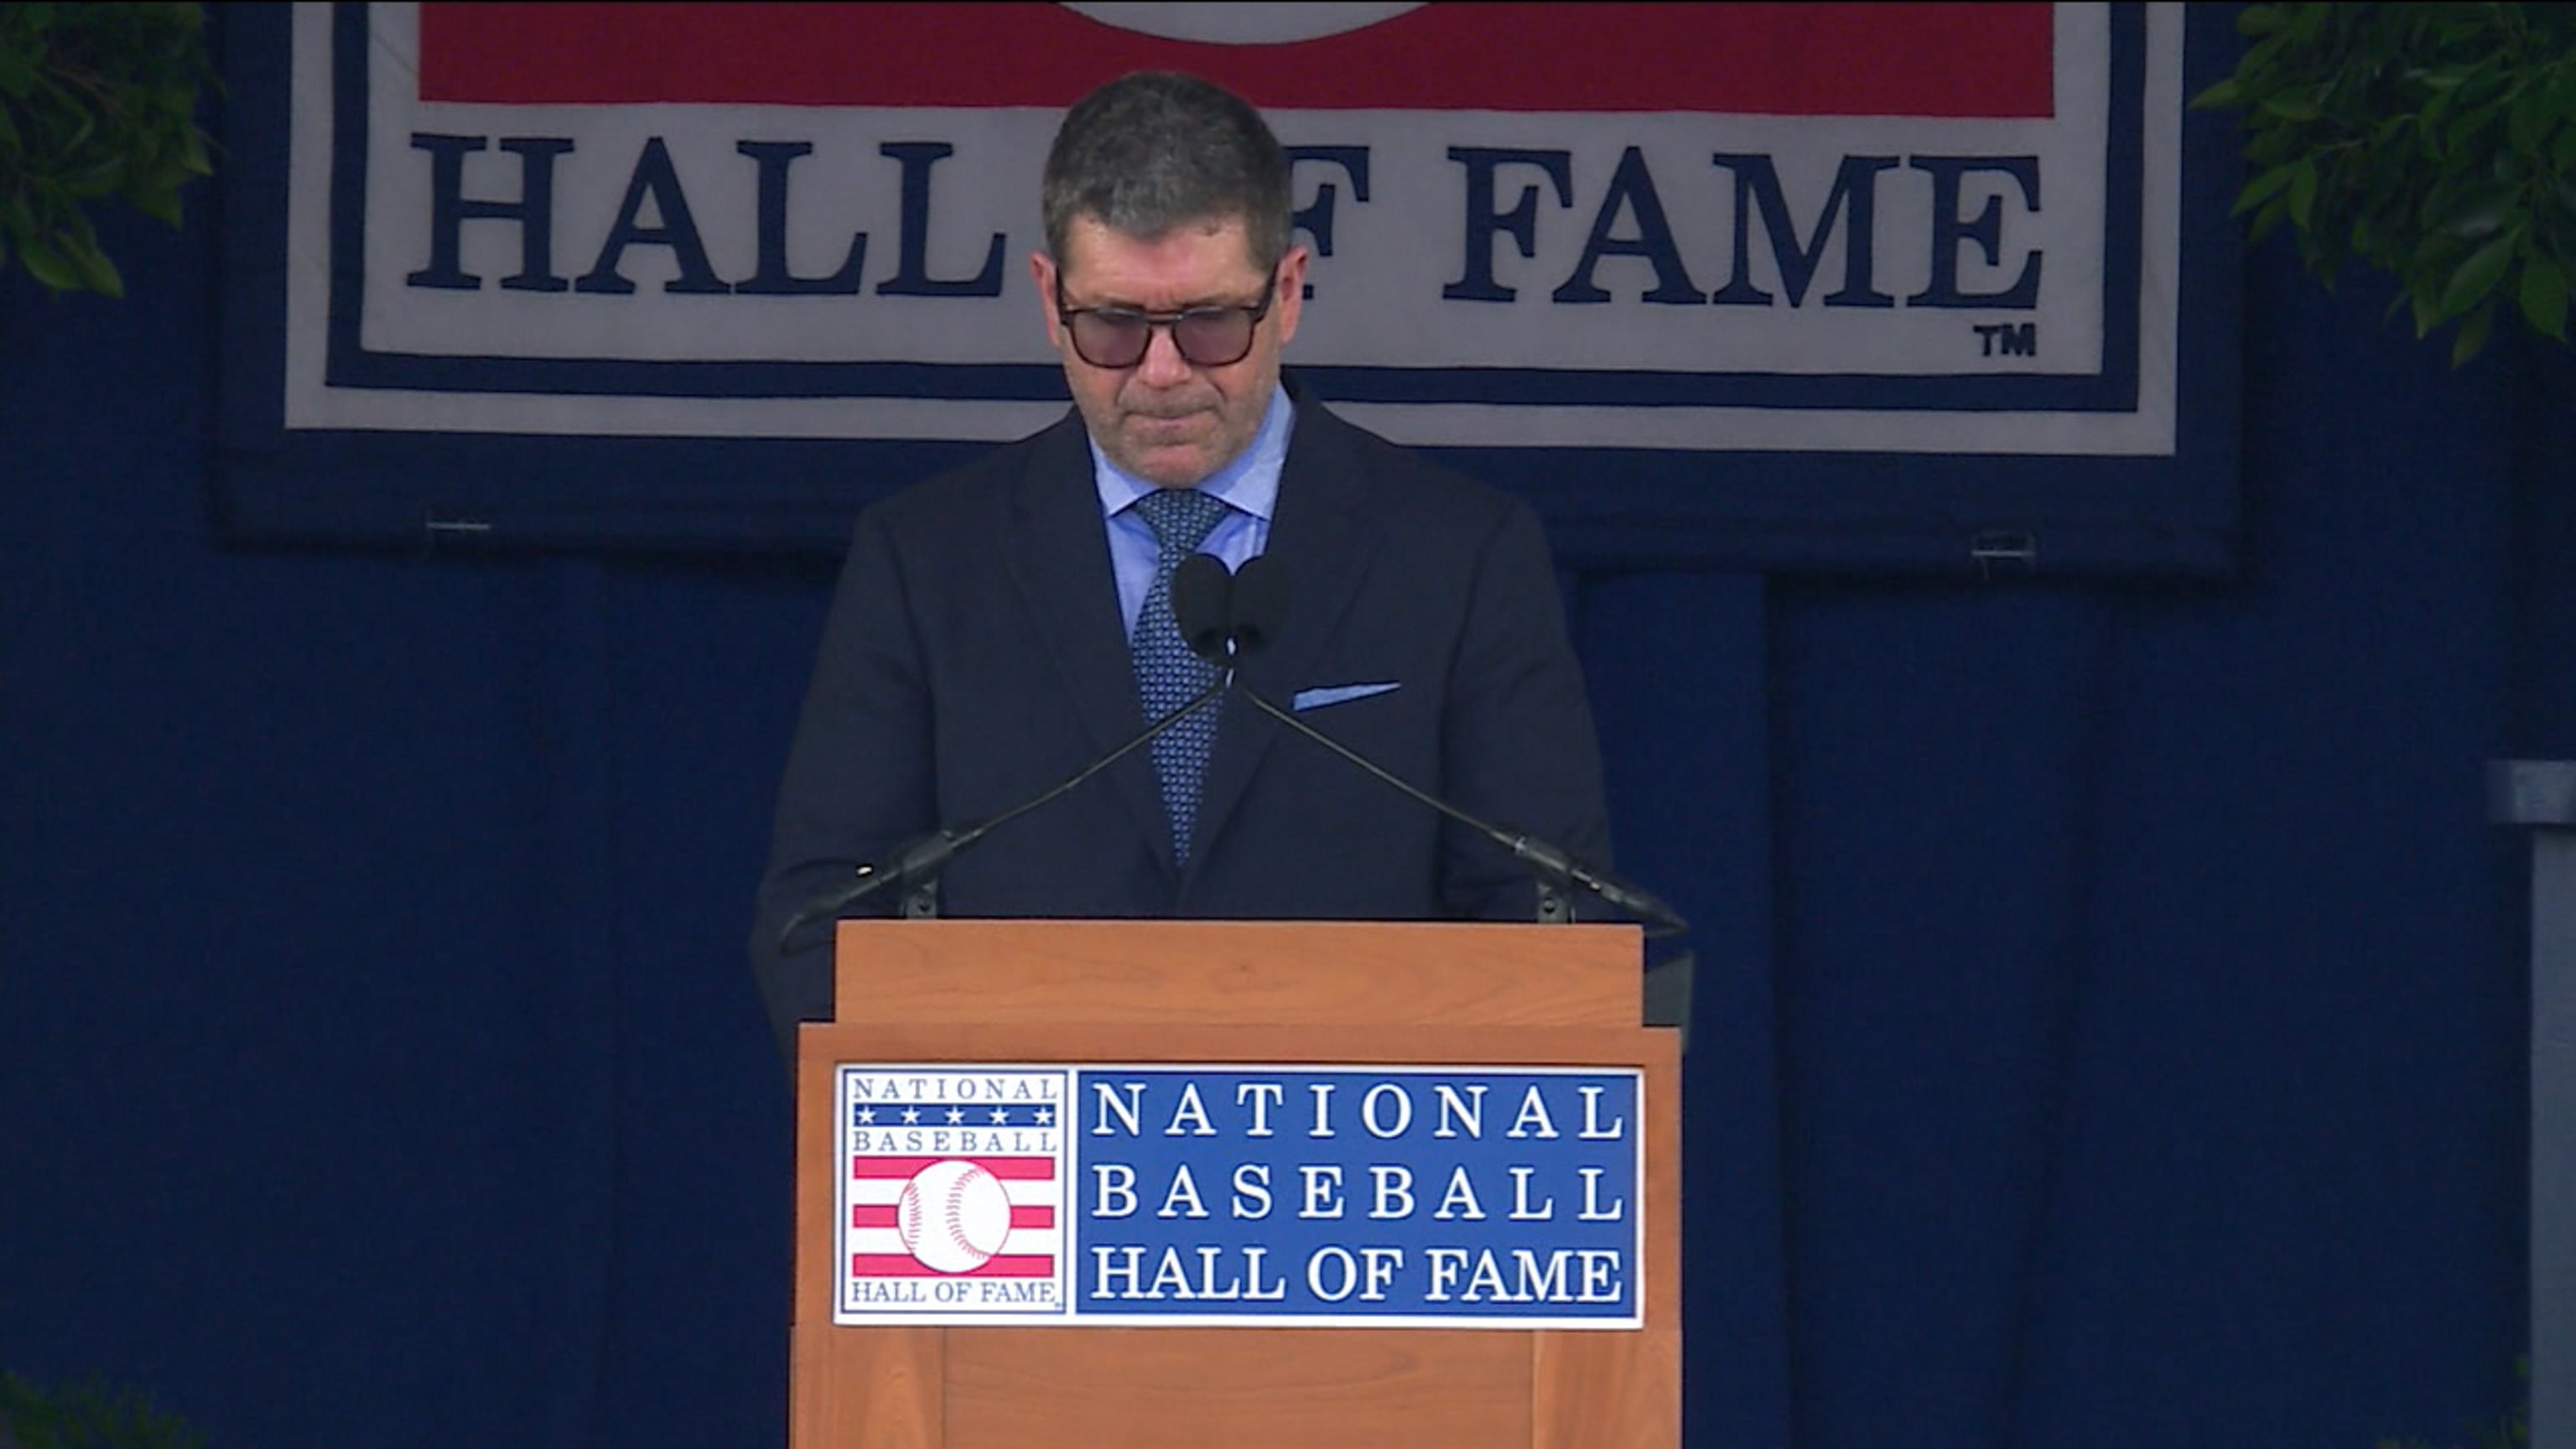 Edgar Martinez: 5 things to know about baseball's new Hall of Famer